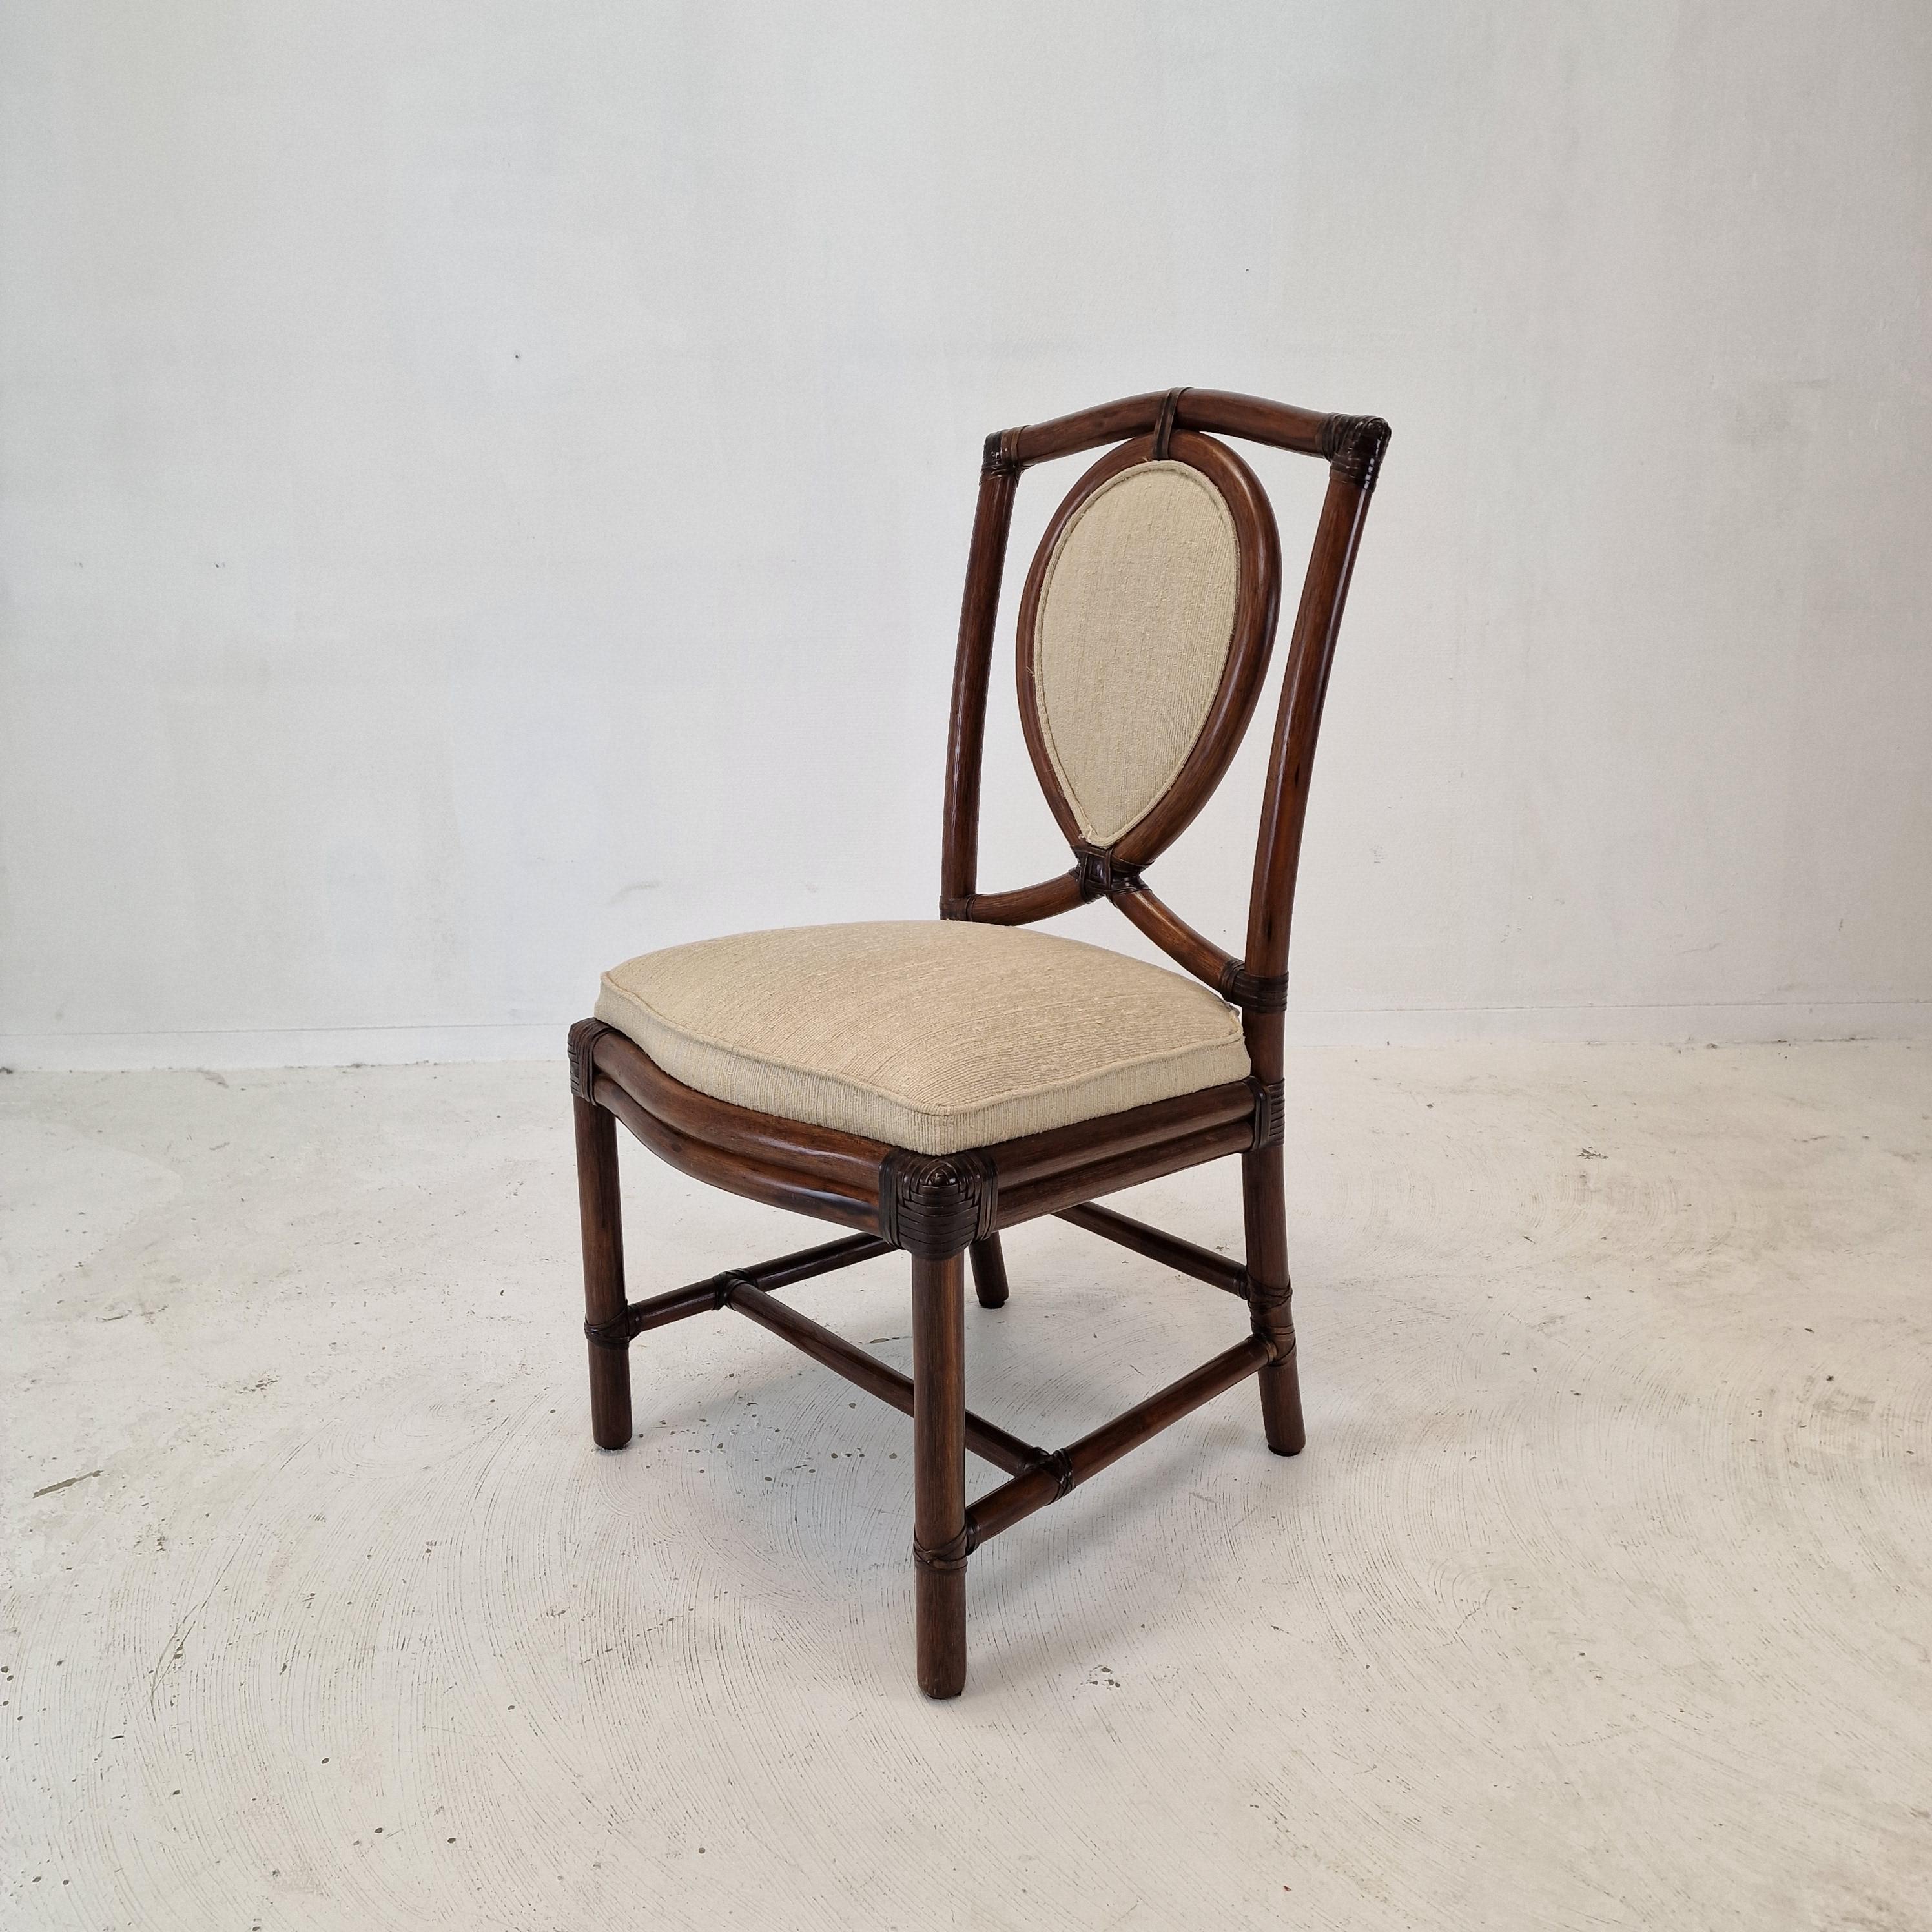 Italian Set of 6 Bamboo Dining Chairs from Gasparucci Italo, 1970s For Sale